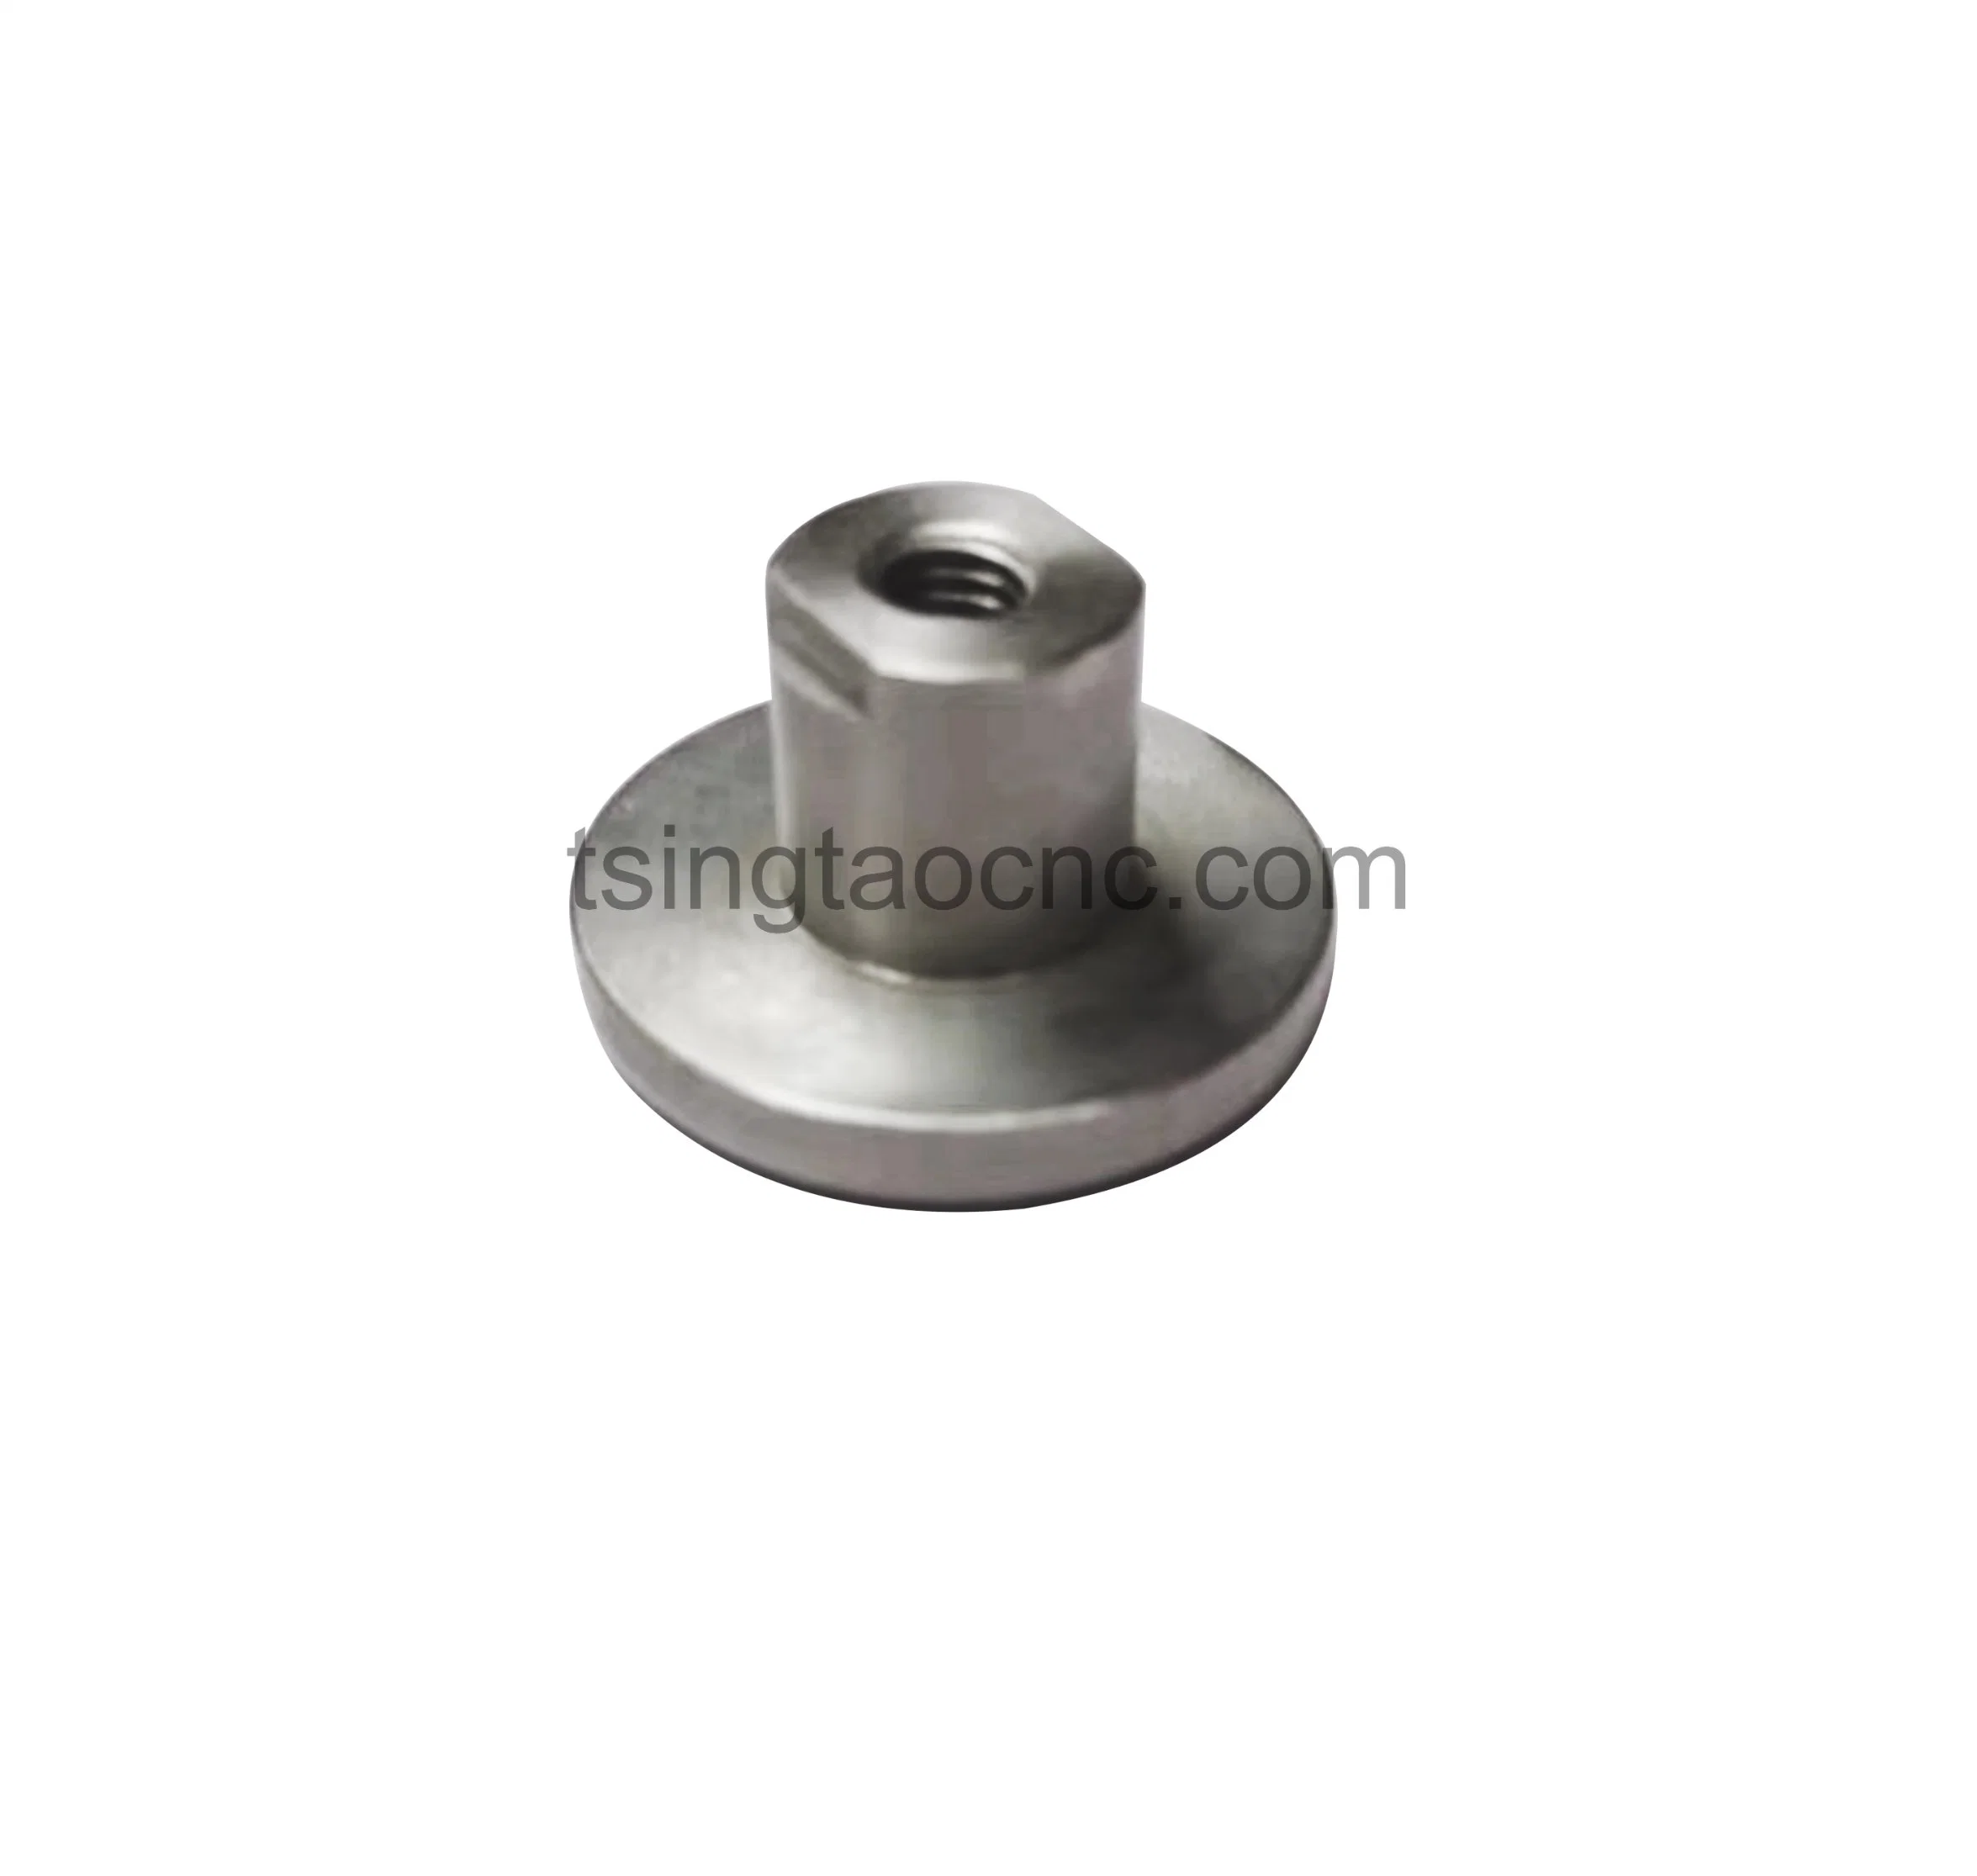 Customized CNC Turning Machining Part for Industrial Equipment